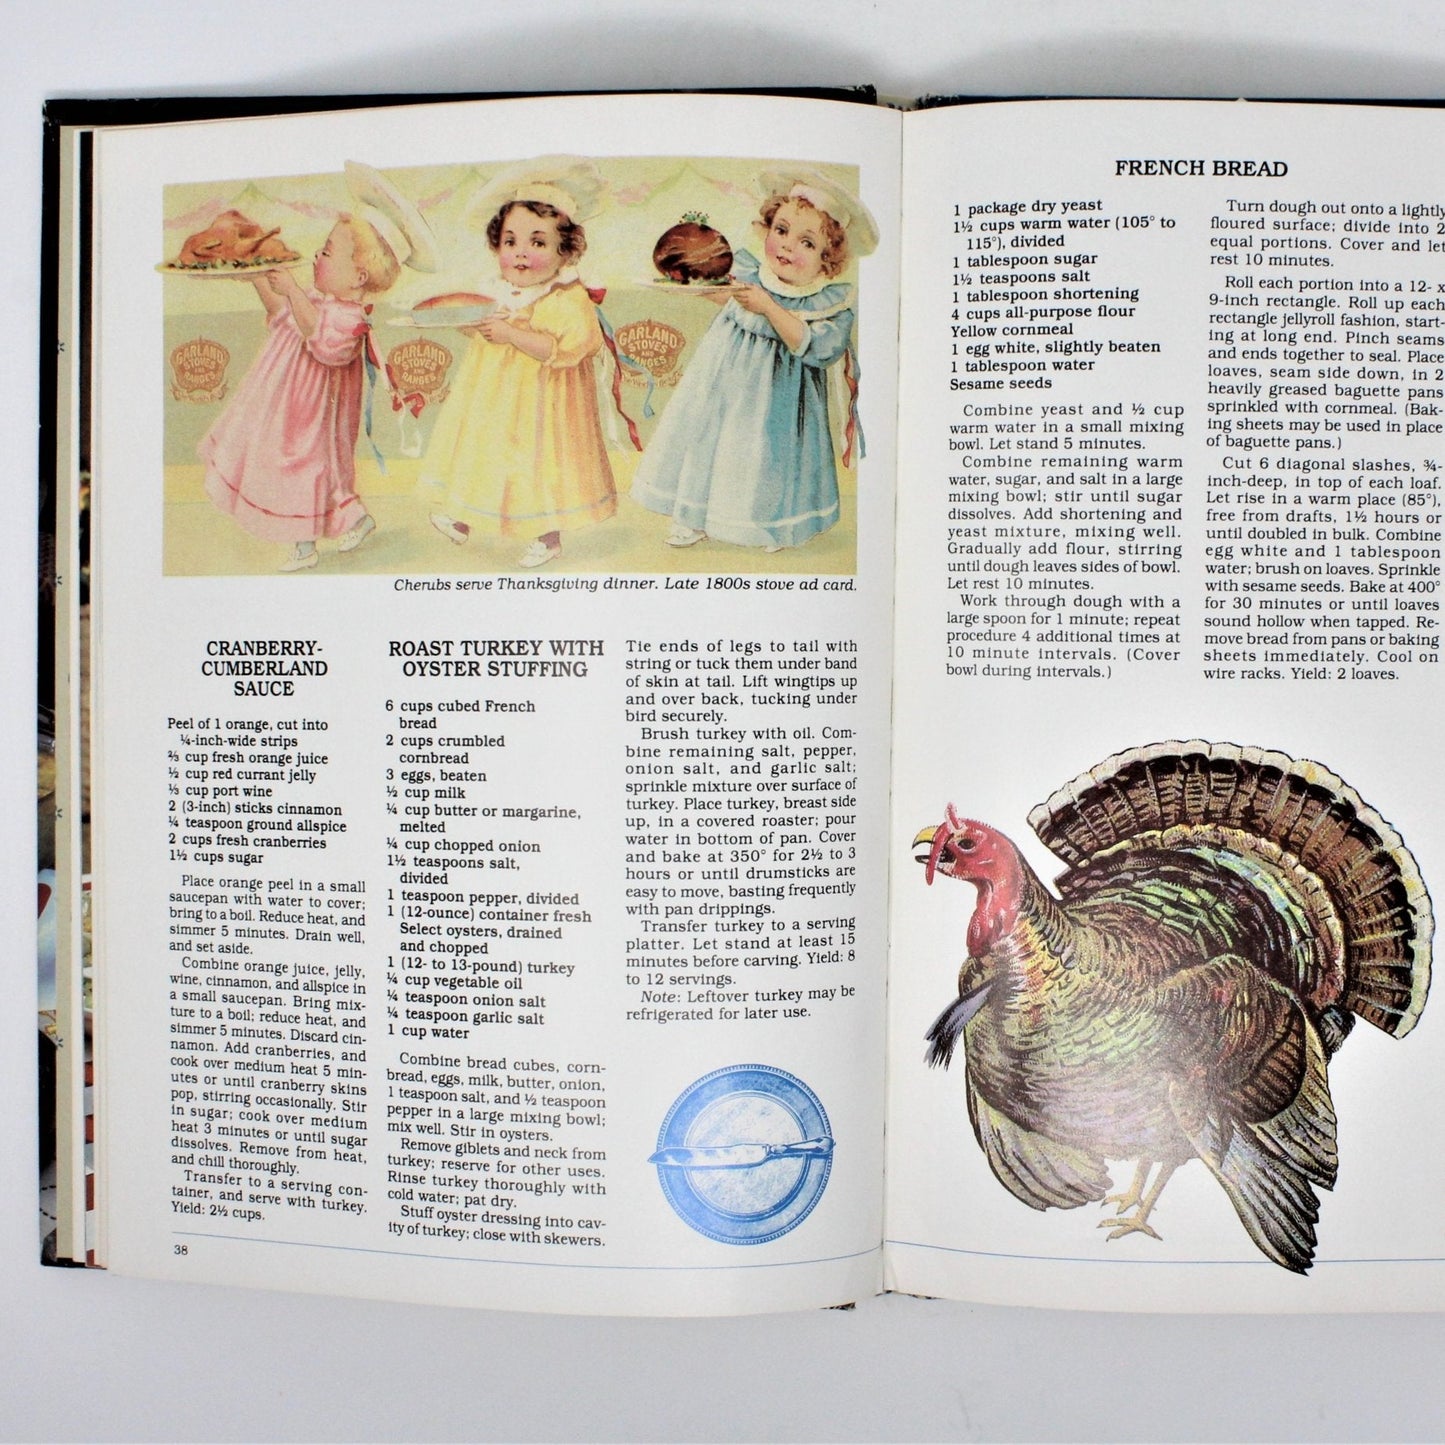 Book, The Southern Heritage Family Gatherings Cookbook, Hardcover, Vintage 1984